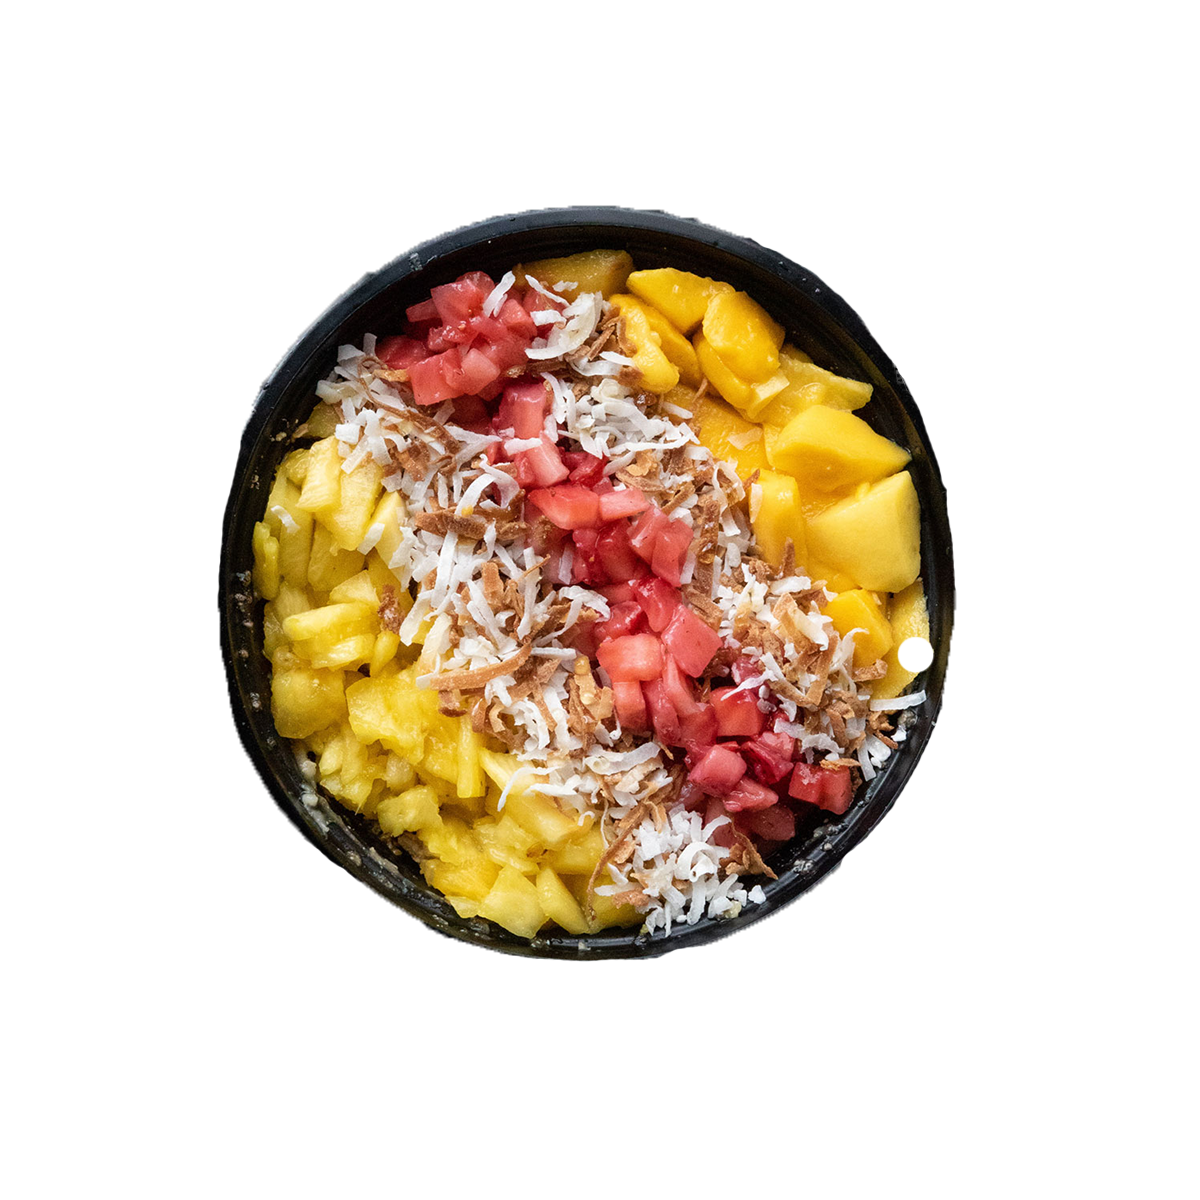 Don't Worry Be Happy Tropical Fruit Oatmeal Bowl Williamsburg Norfolk Virginia Beach Town Center Cold Pressed